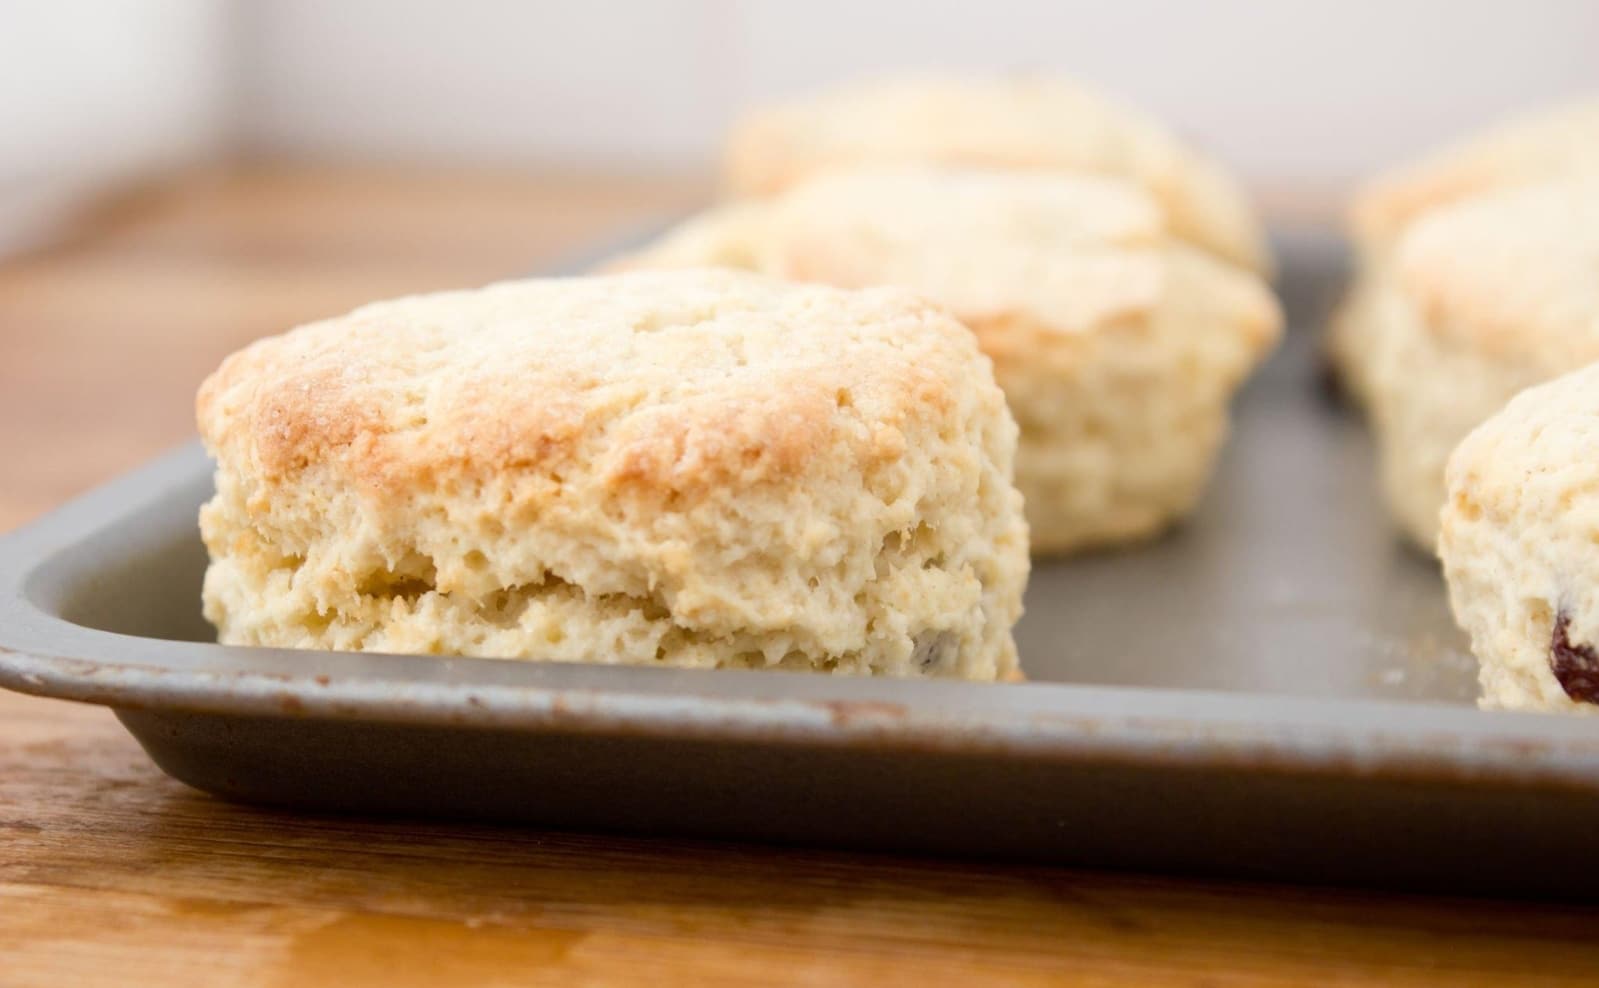 What Temperature to Bake Biscuits?